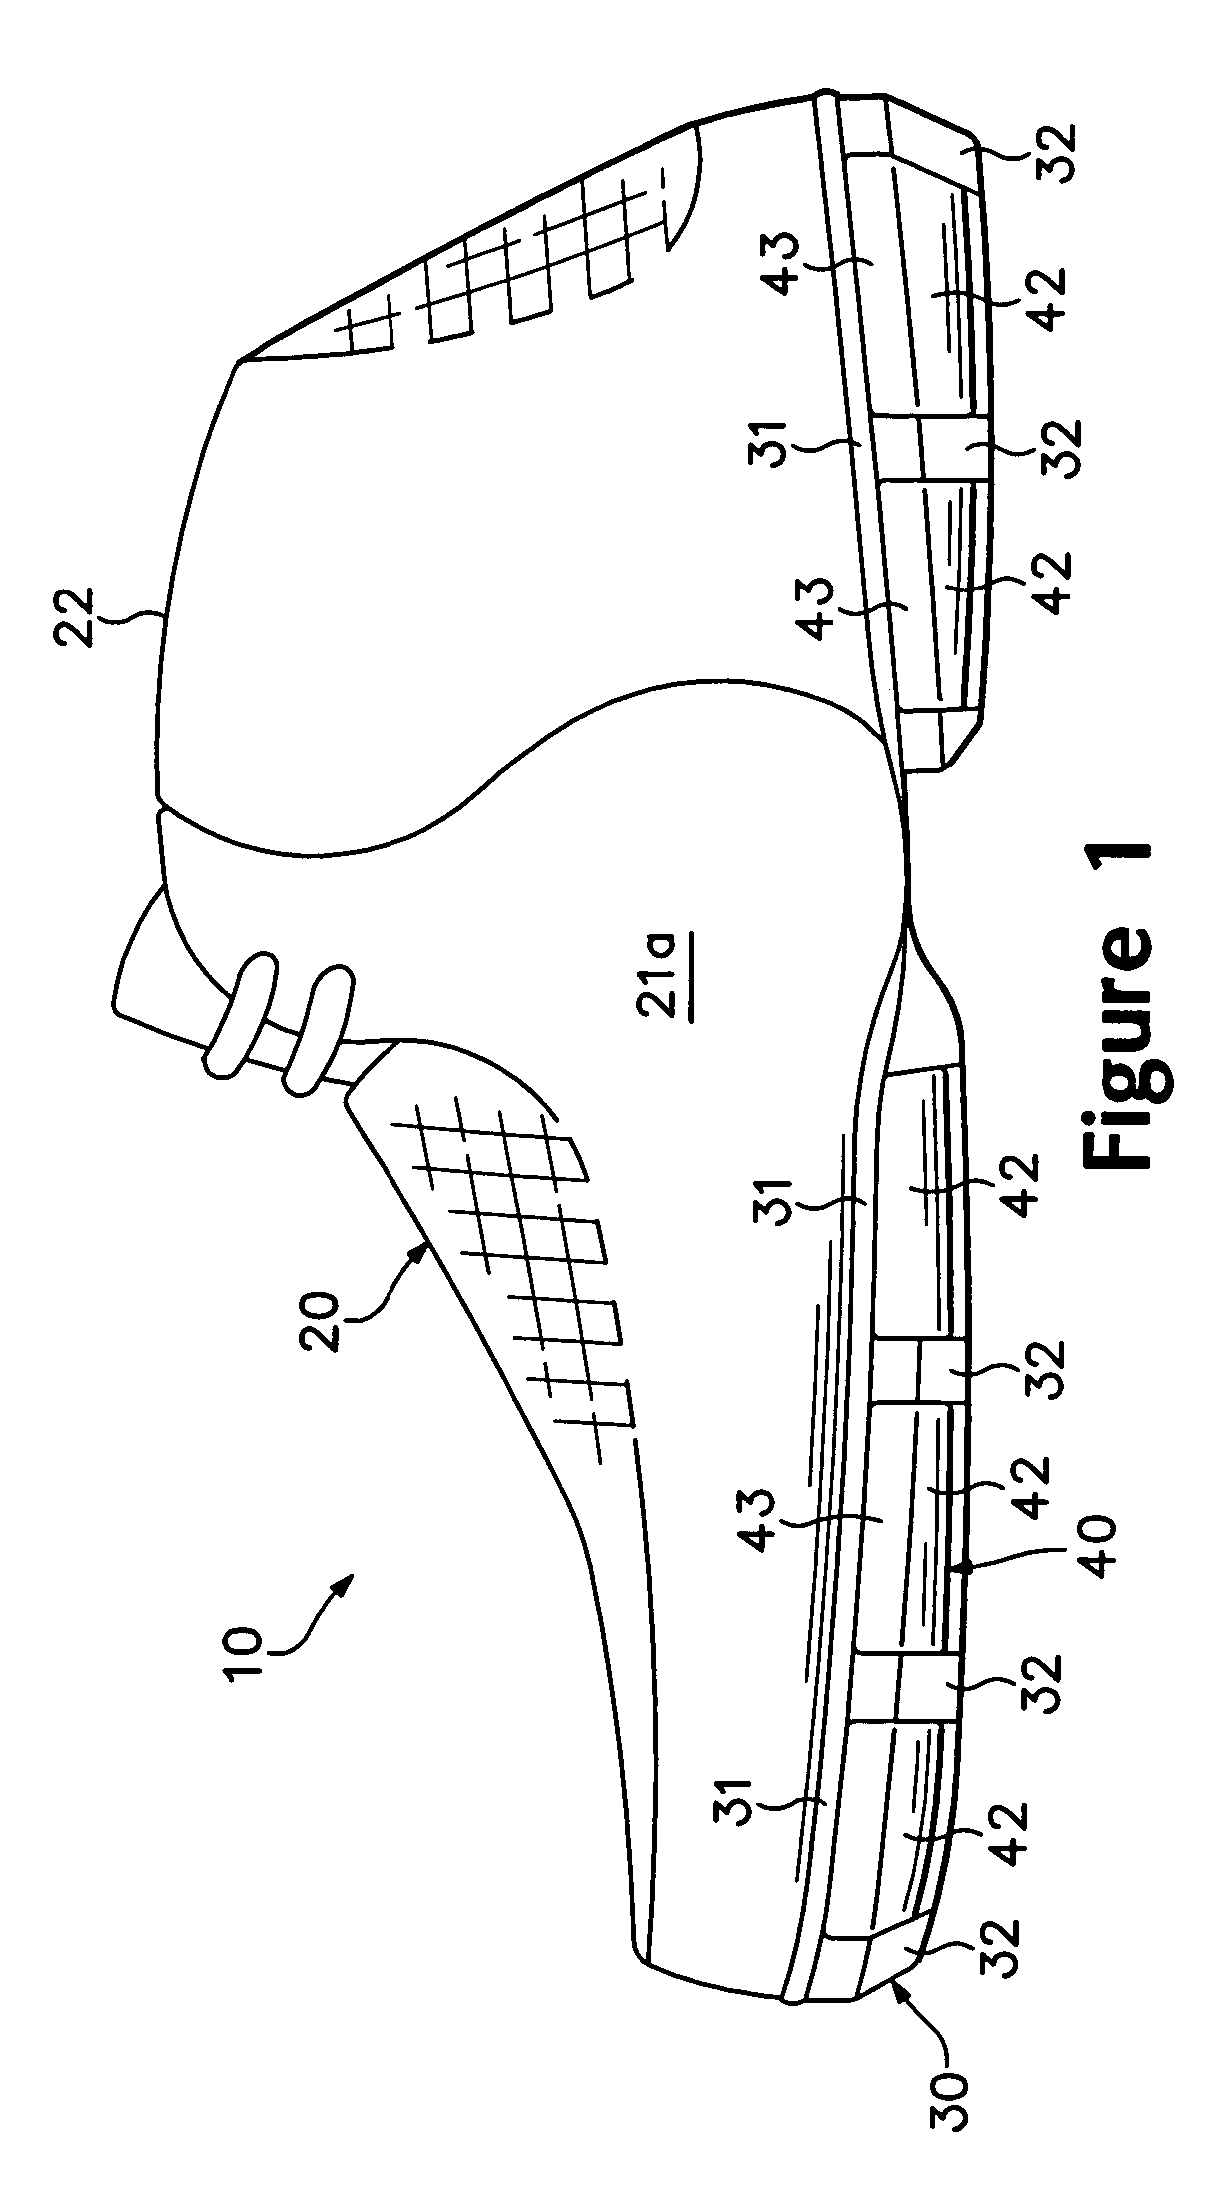 Article of footwear with a removable midsole element